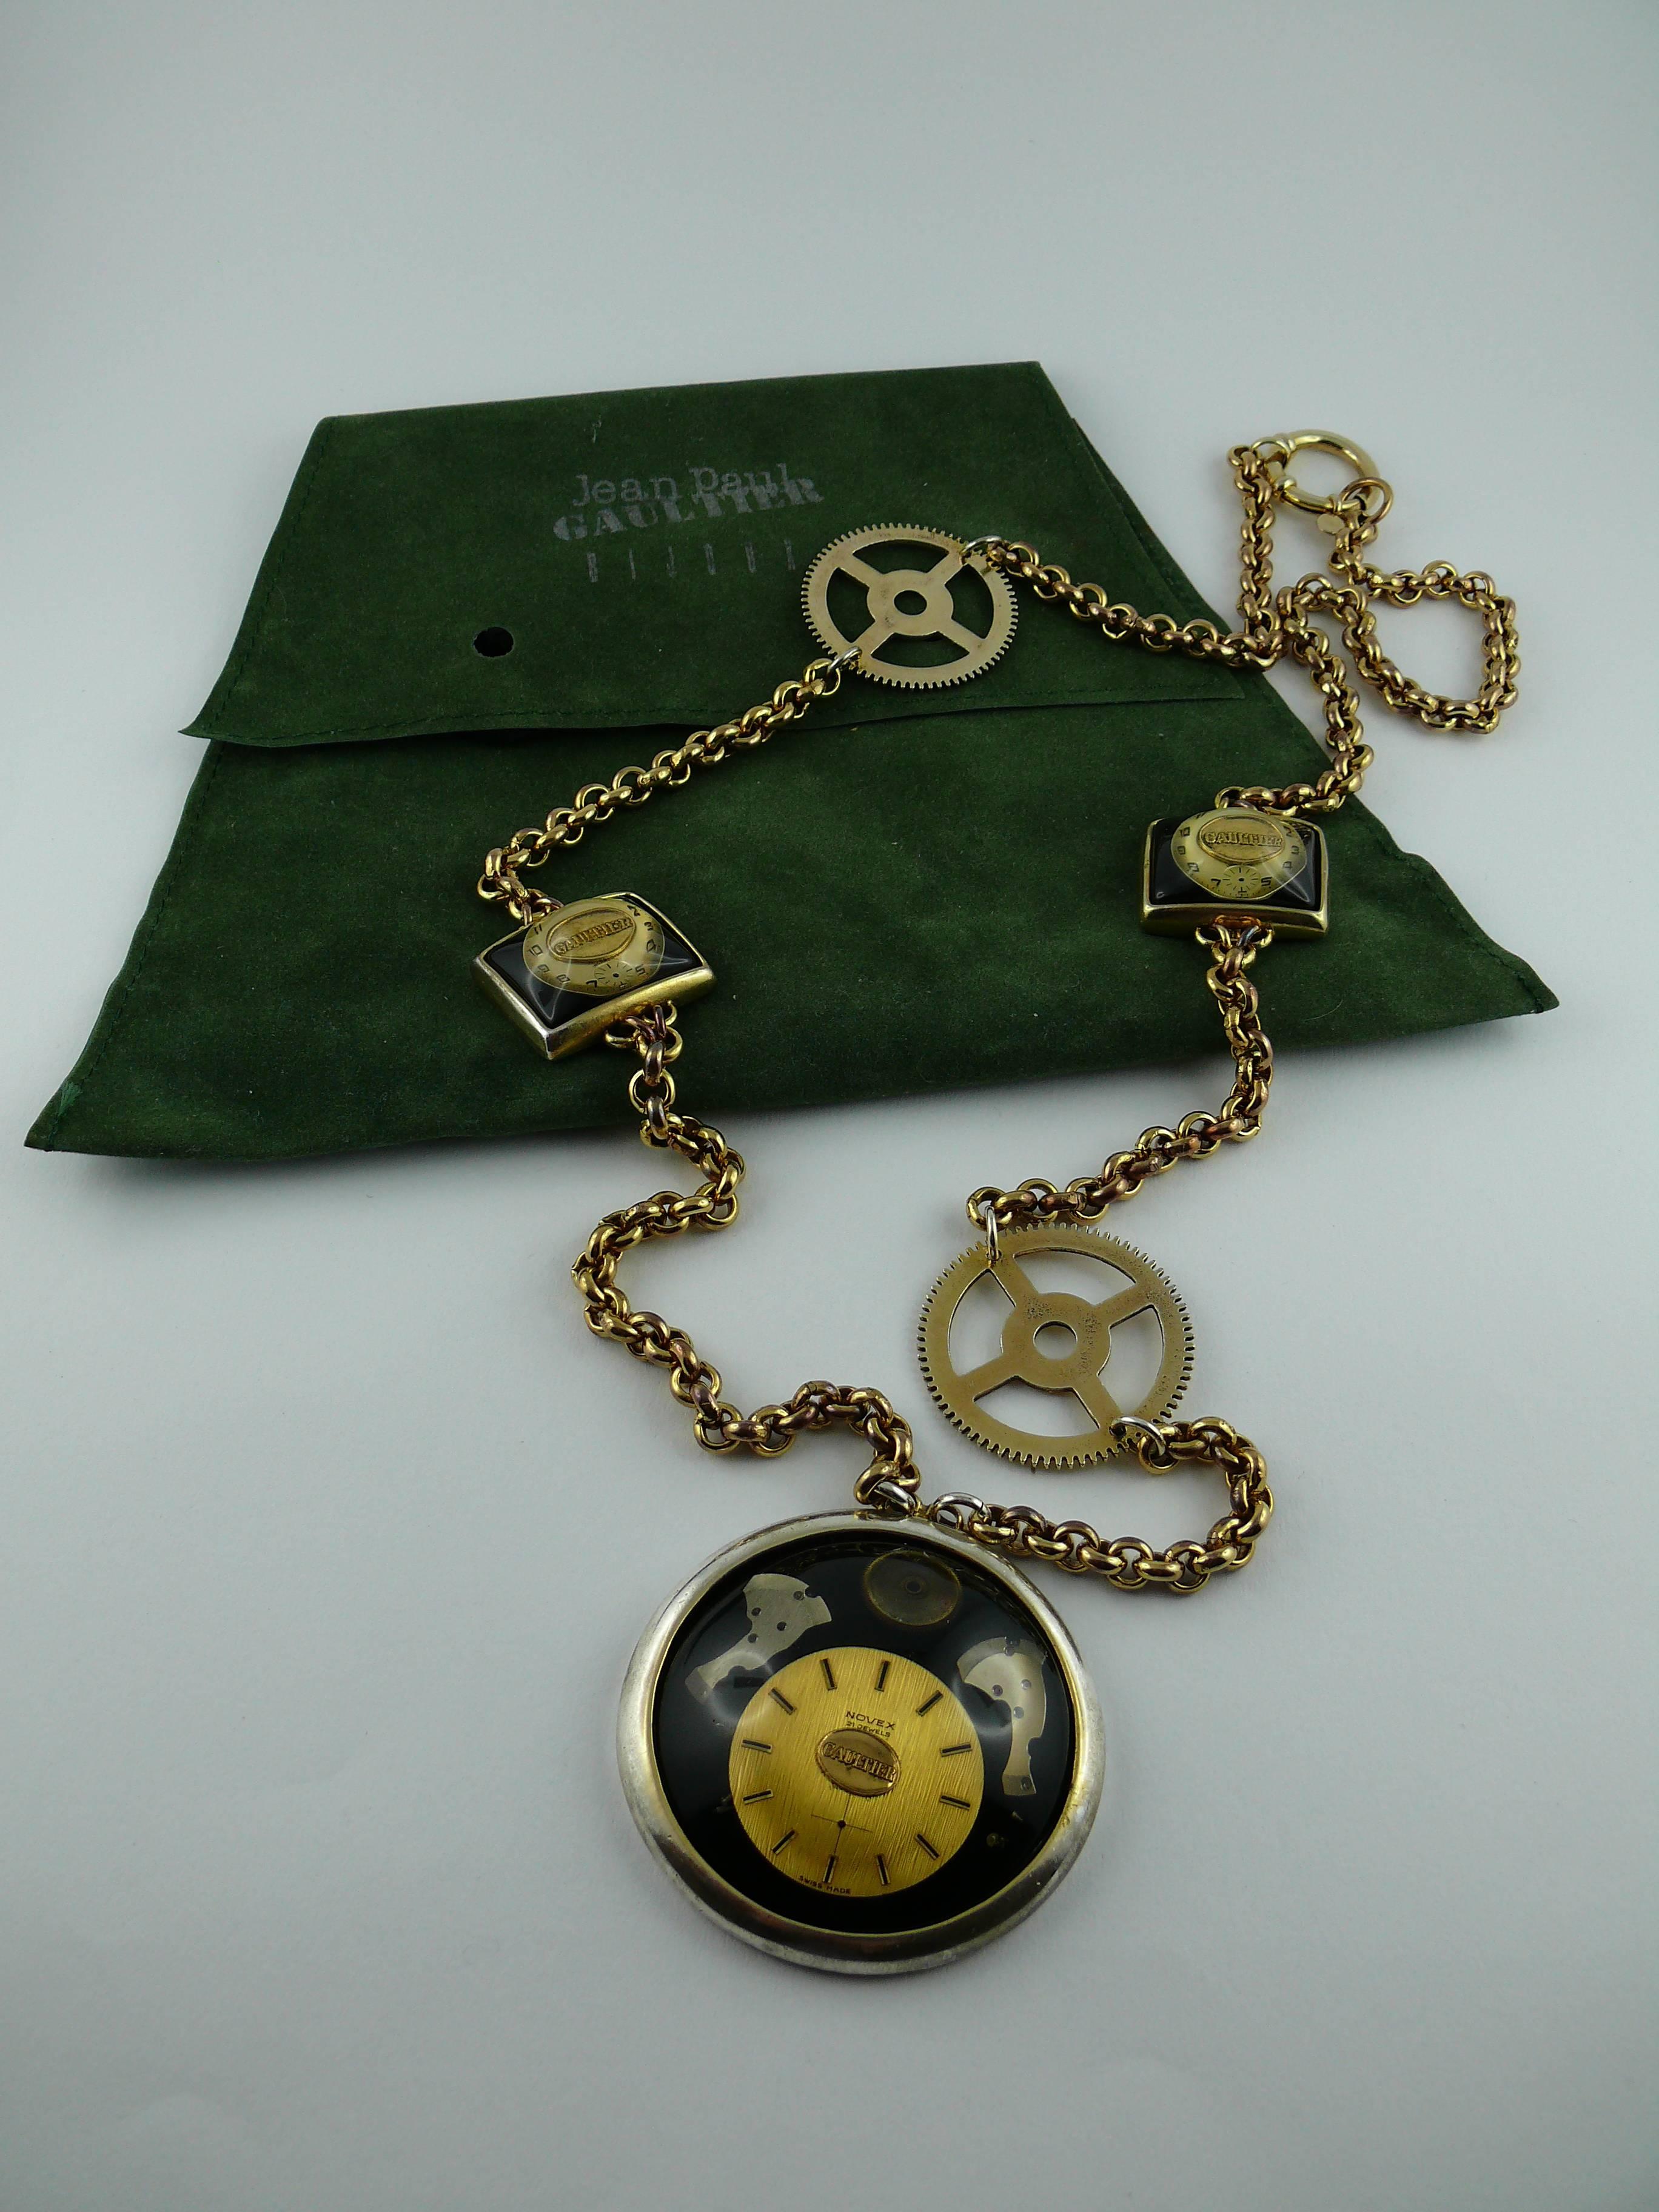 Jean Paul Gaultier Vintage Steampunk Watch Necklace In Fair Condition For Sale In Nice, FR